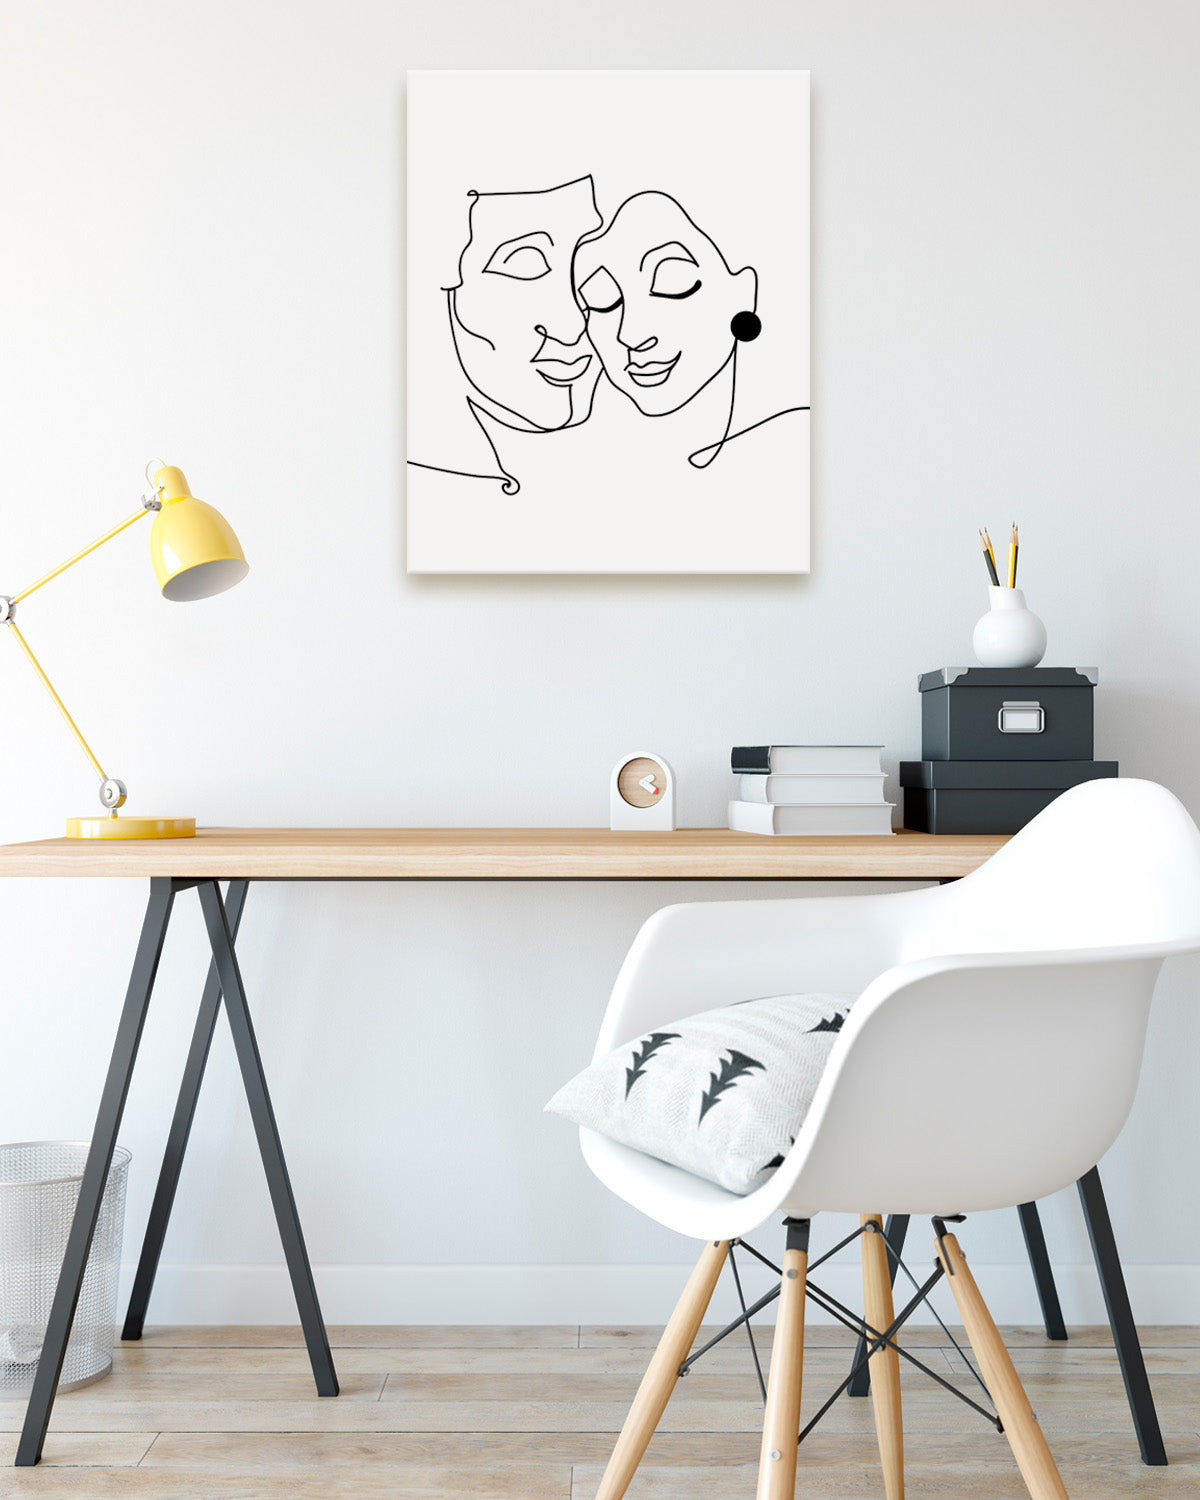 Abstract Line Drawing of A Man and A Woman - Wall Decor Art Print with a white background